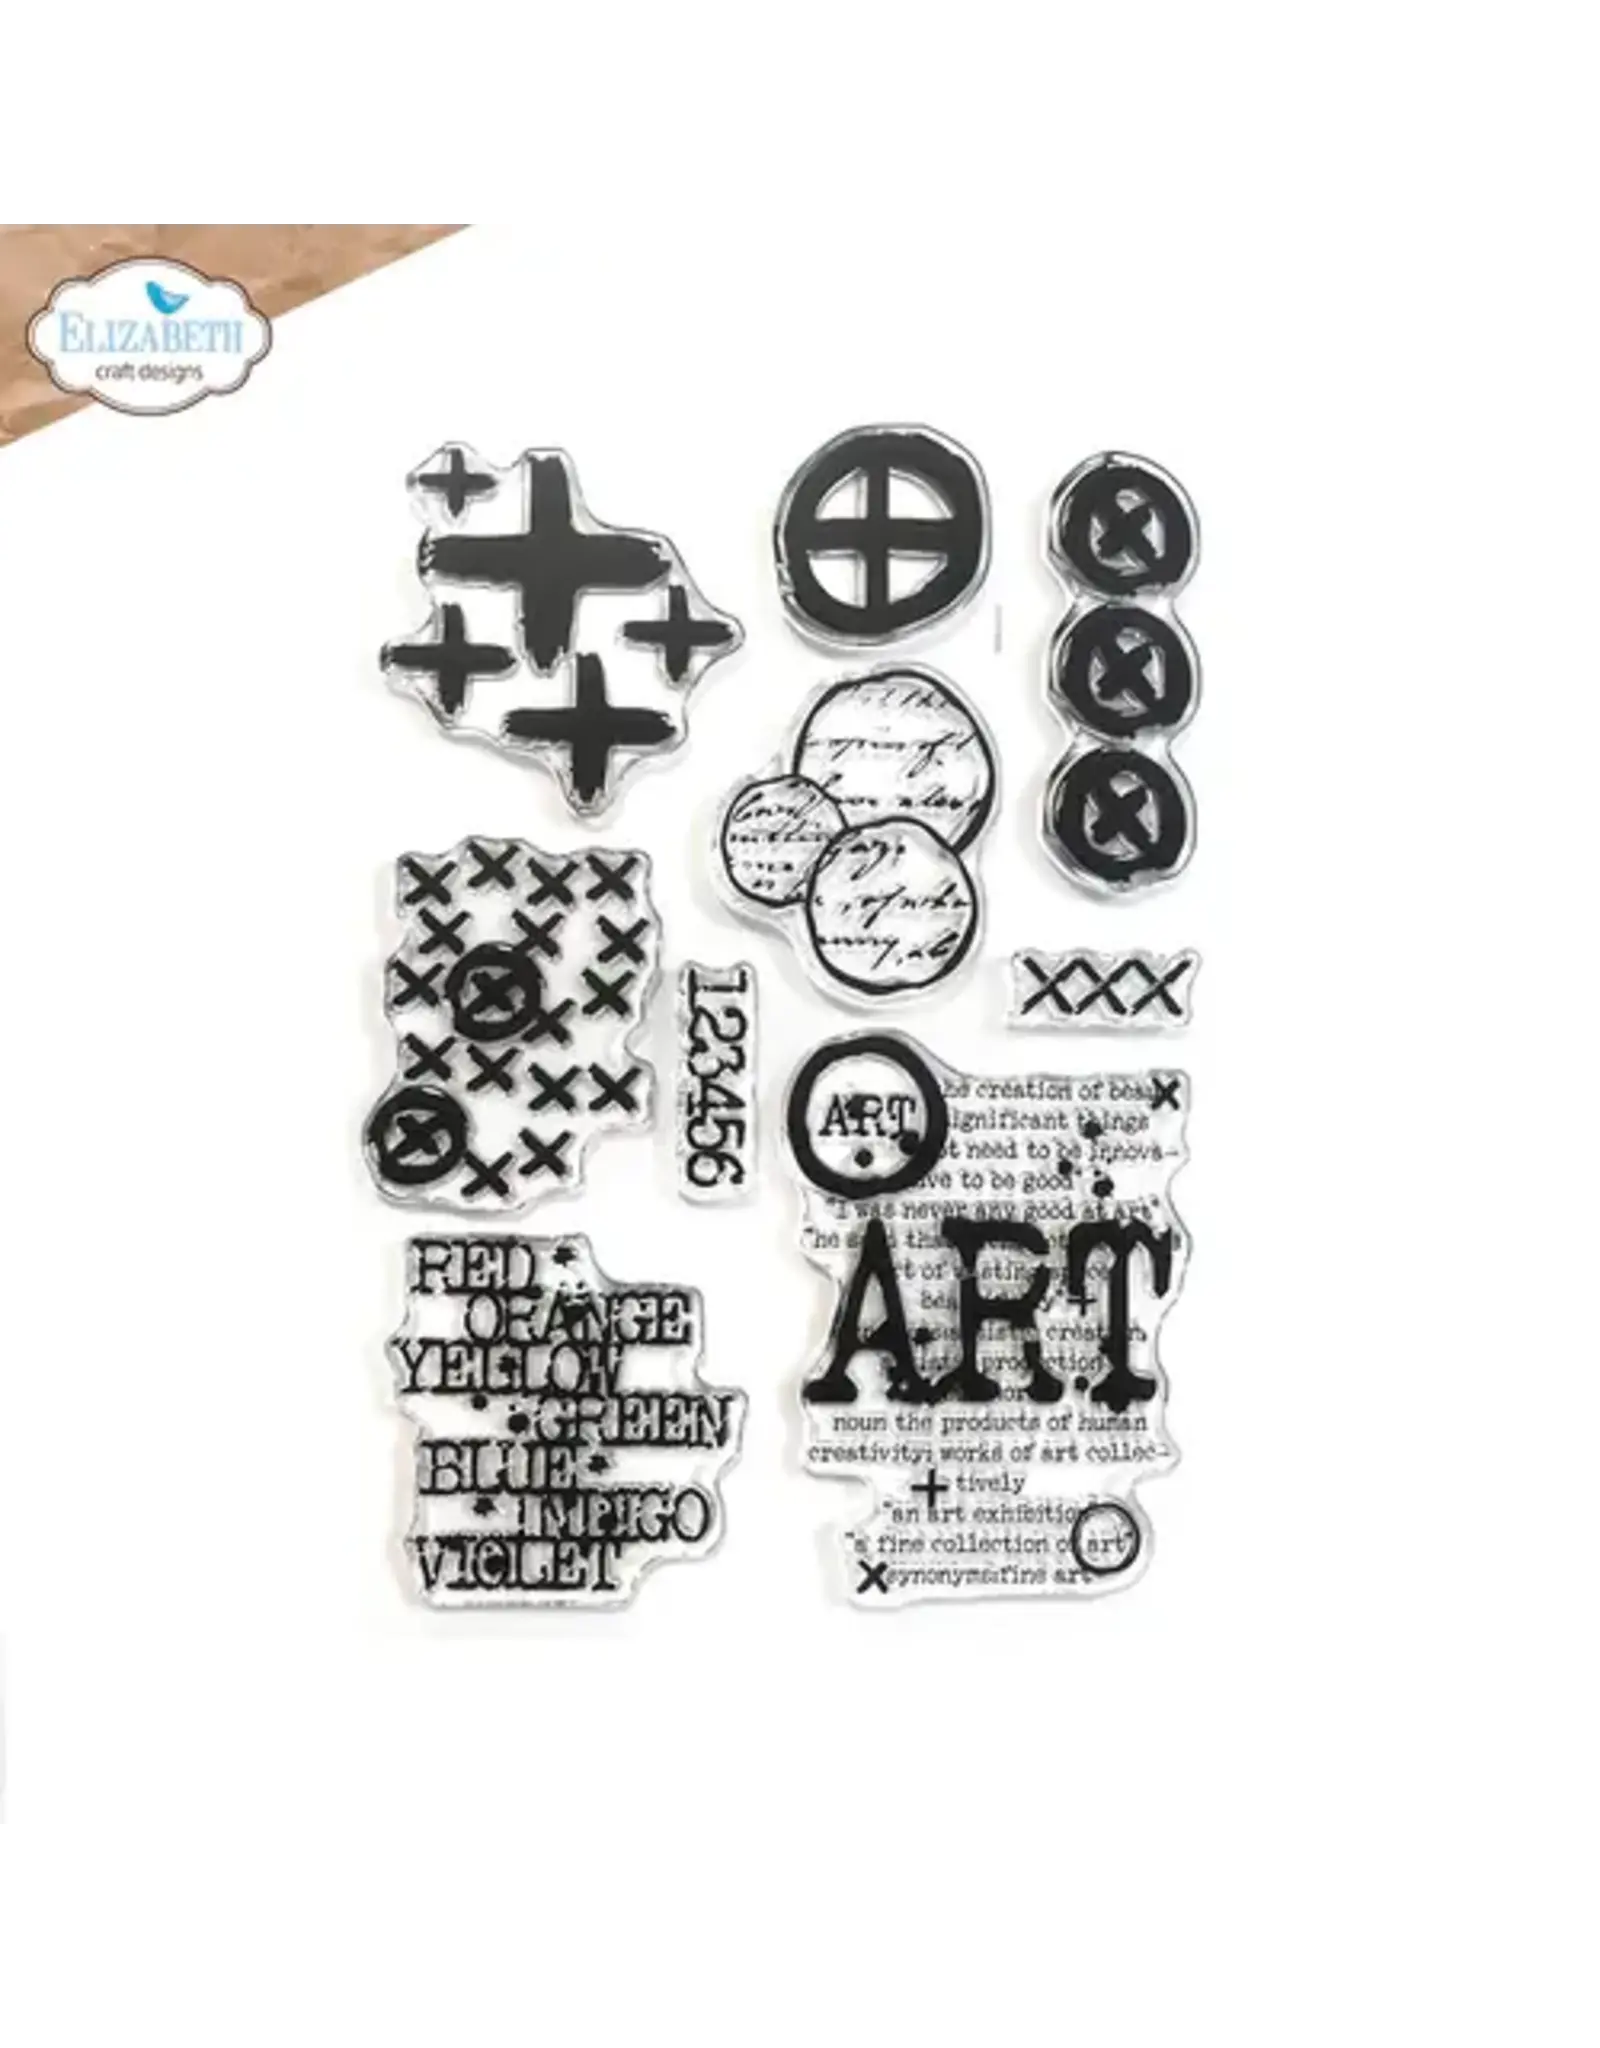 ELIZABETH CRAFT DESIGNS ELIZABETH CRAFT DESIGNS ART JOURNAL SPECIALS BY  DEVID PLUSSES AND MORE CLEAR STAMP SET